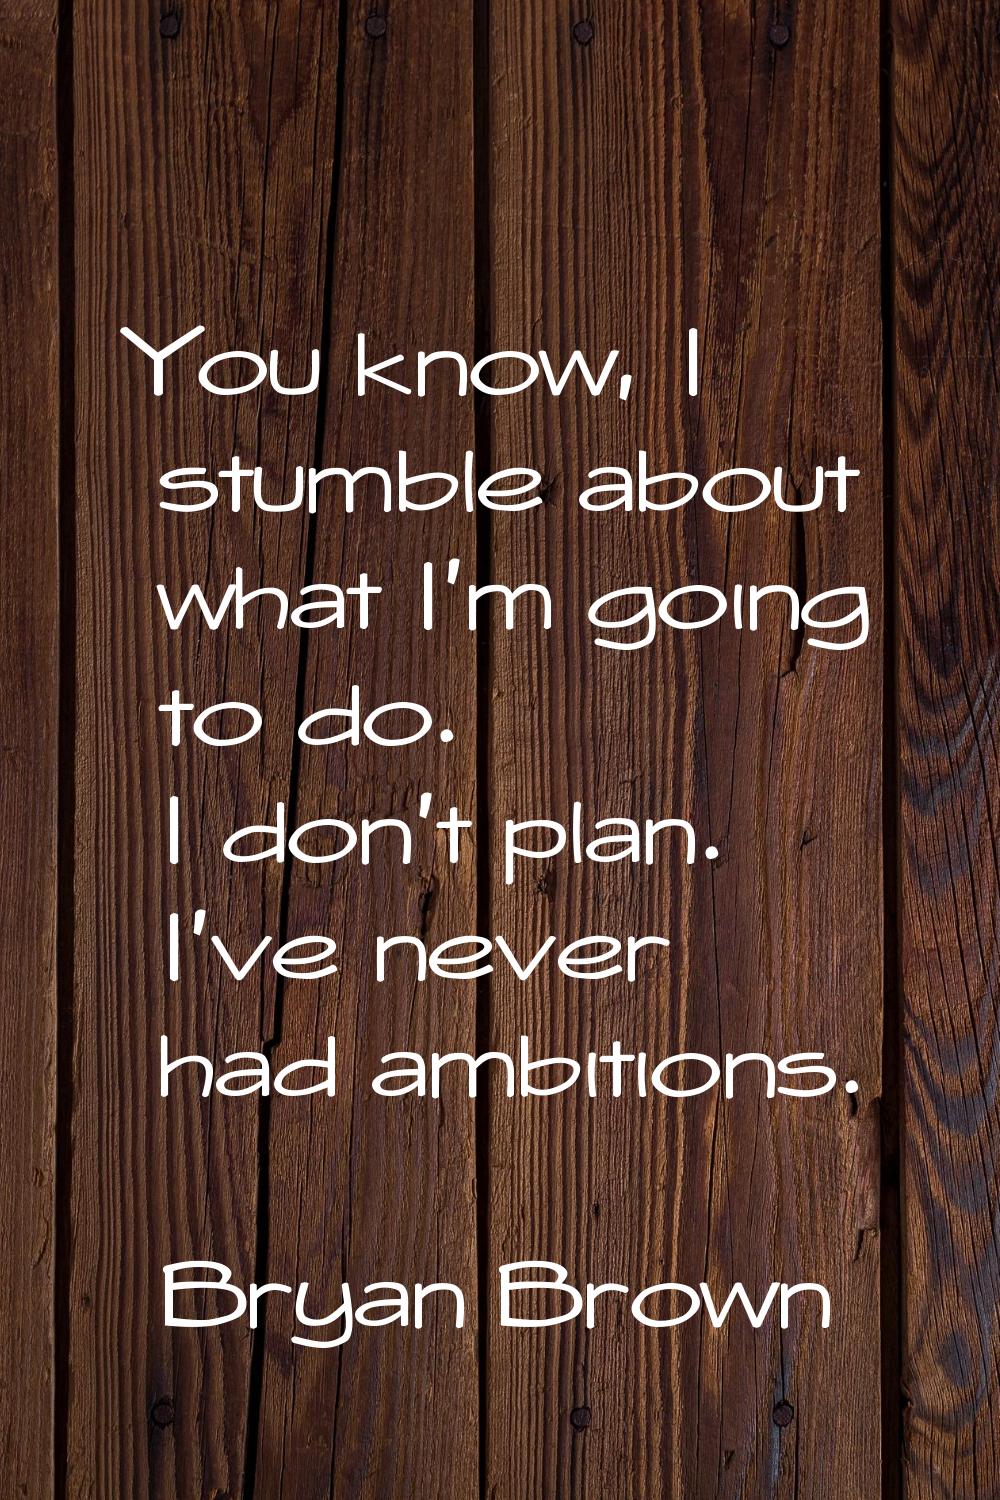 You know, I stumble about what I'm going to do. I don't plan. I've never had ambitions.